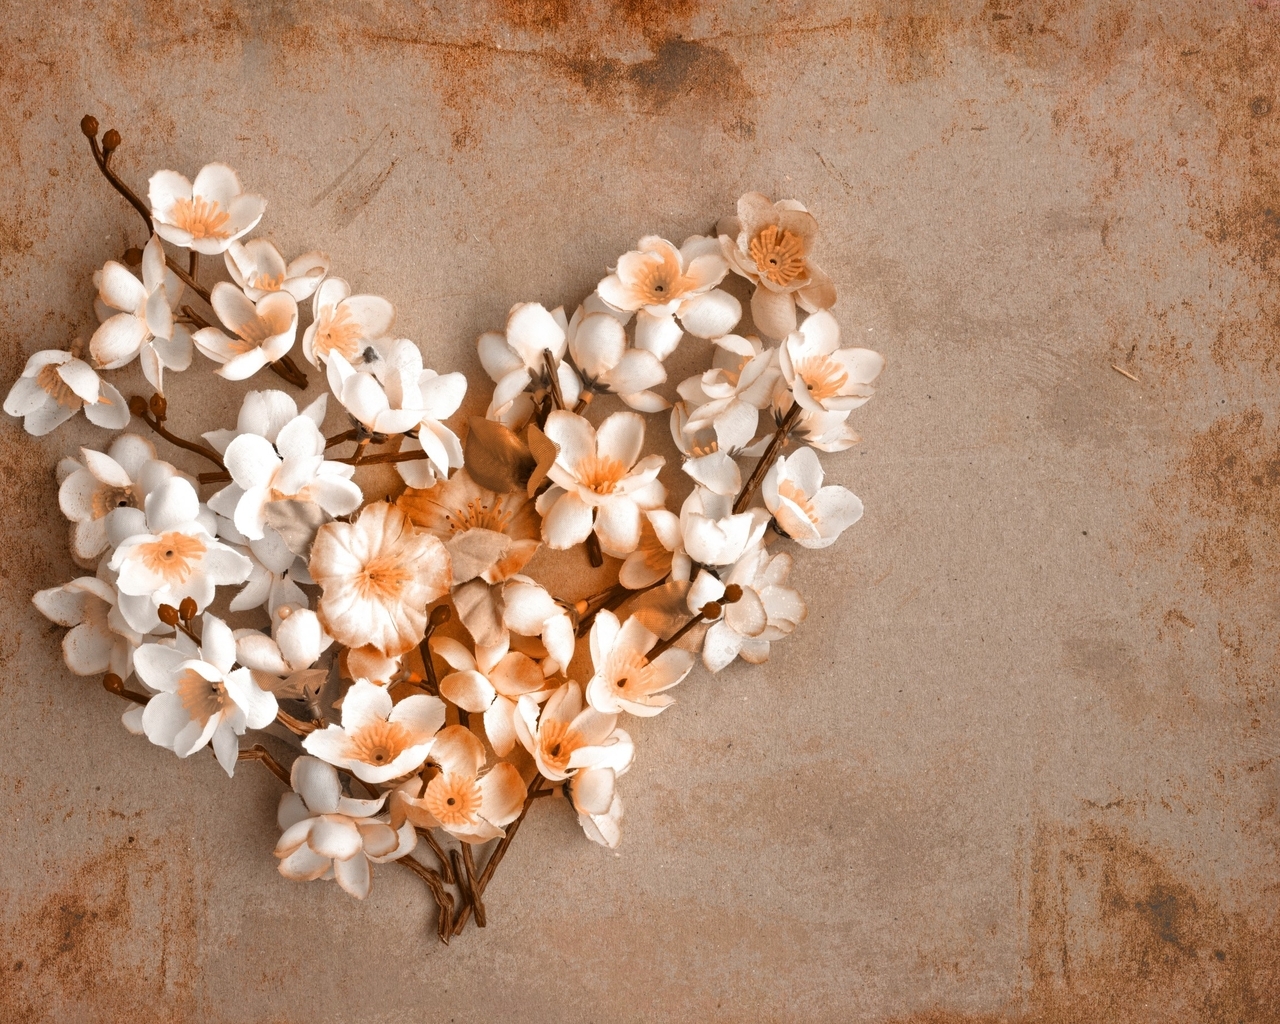 Image: Flowers, branches, heart, paper, vintage